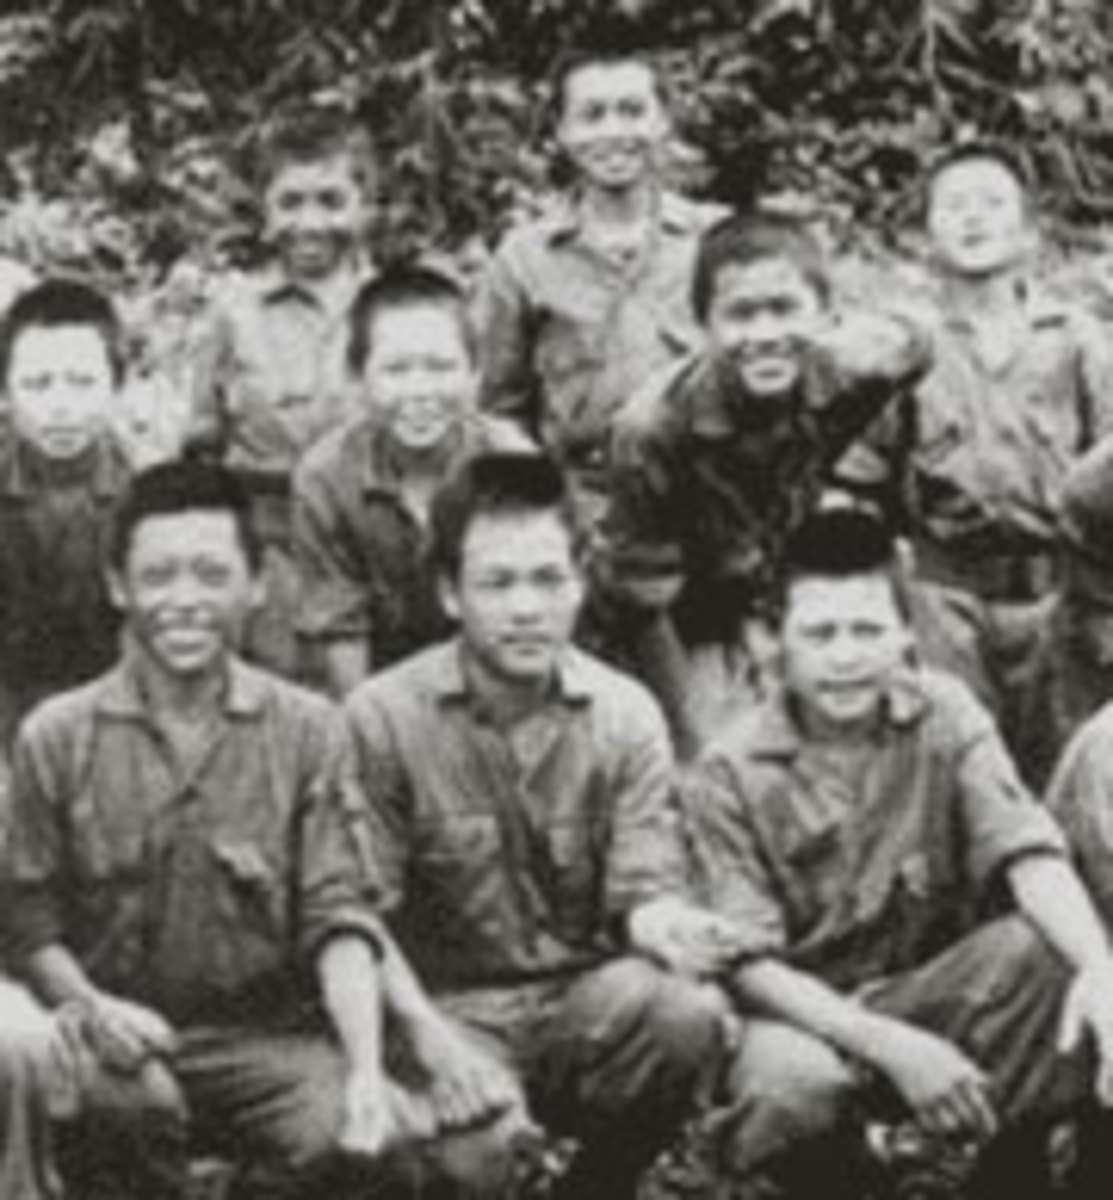 Hmong soldiers who were trained to fight Communism. Courtesy library.thinkquest.org